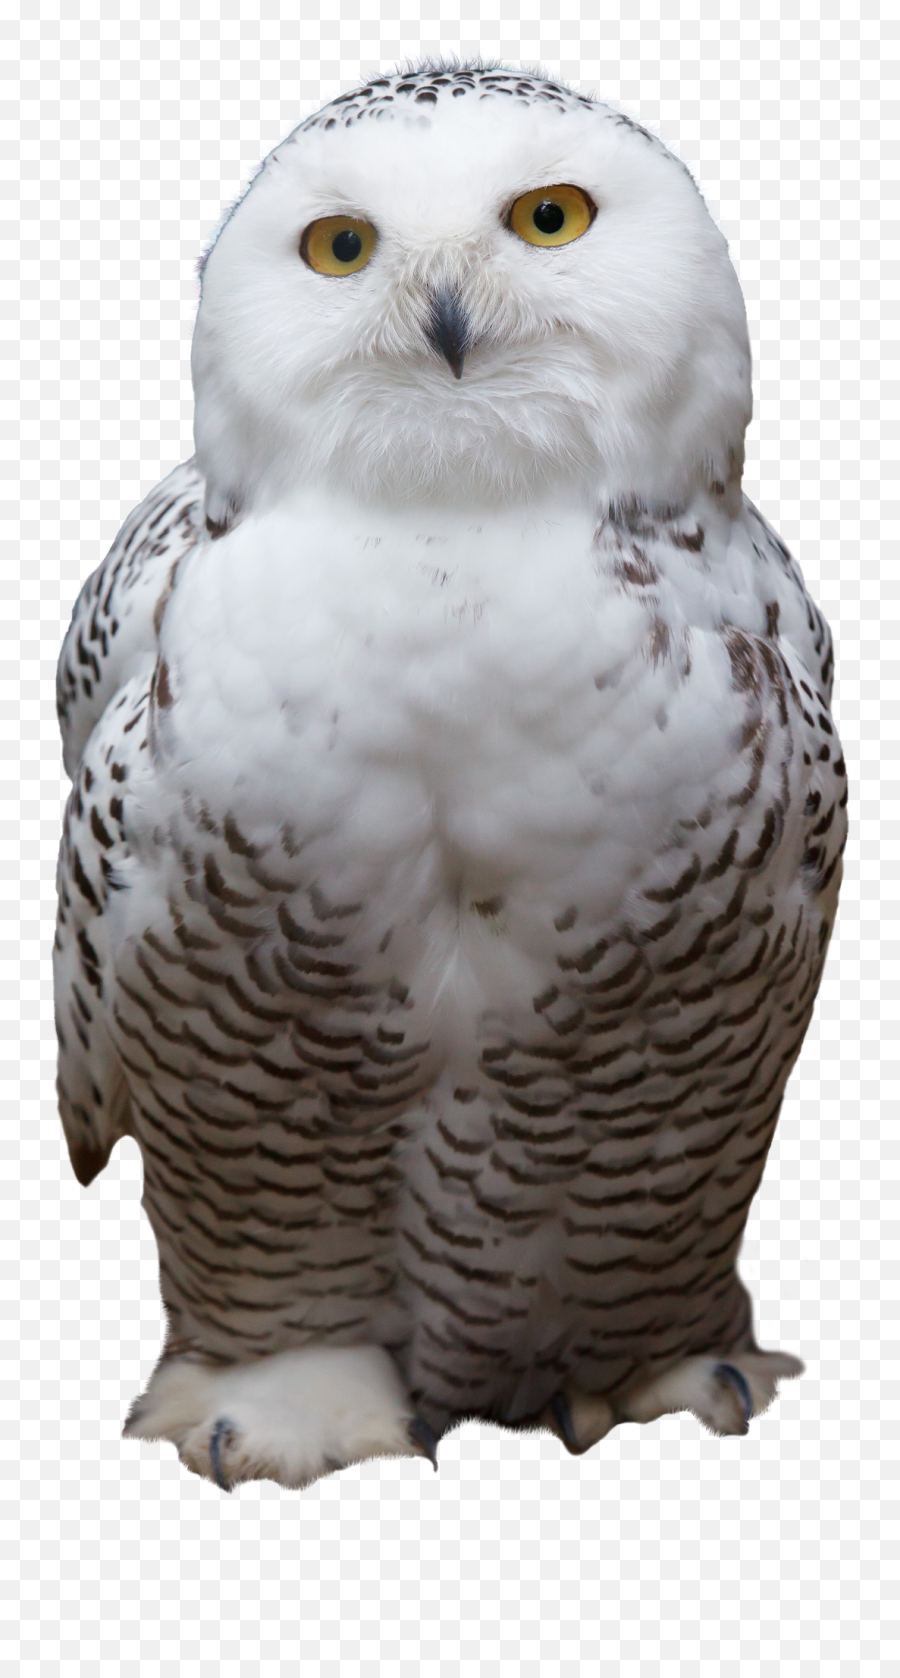 Hd Snowy Owl Png Transparent Image - White Owl Png,Ovo Owl Png